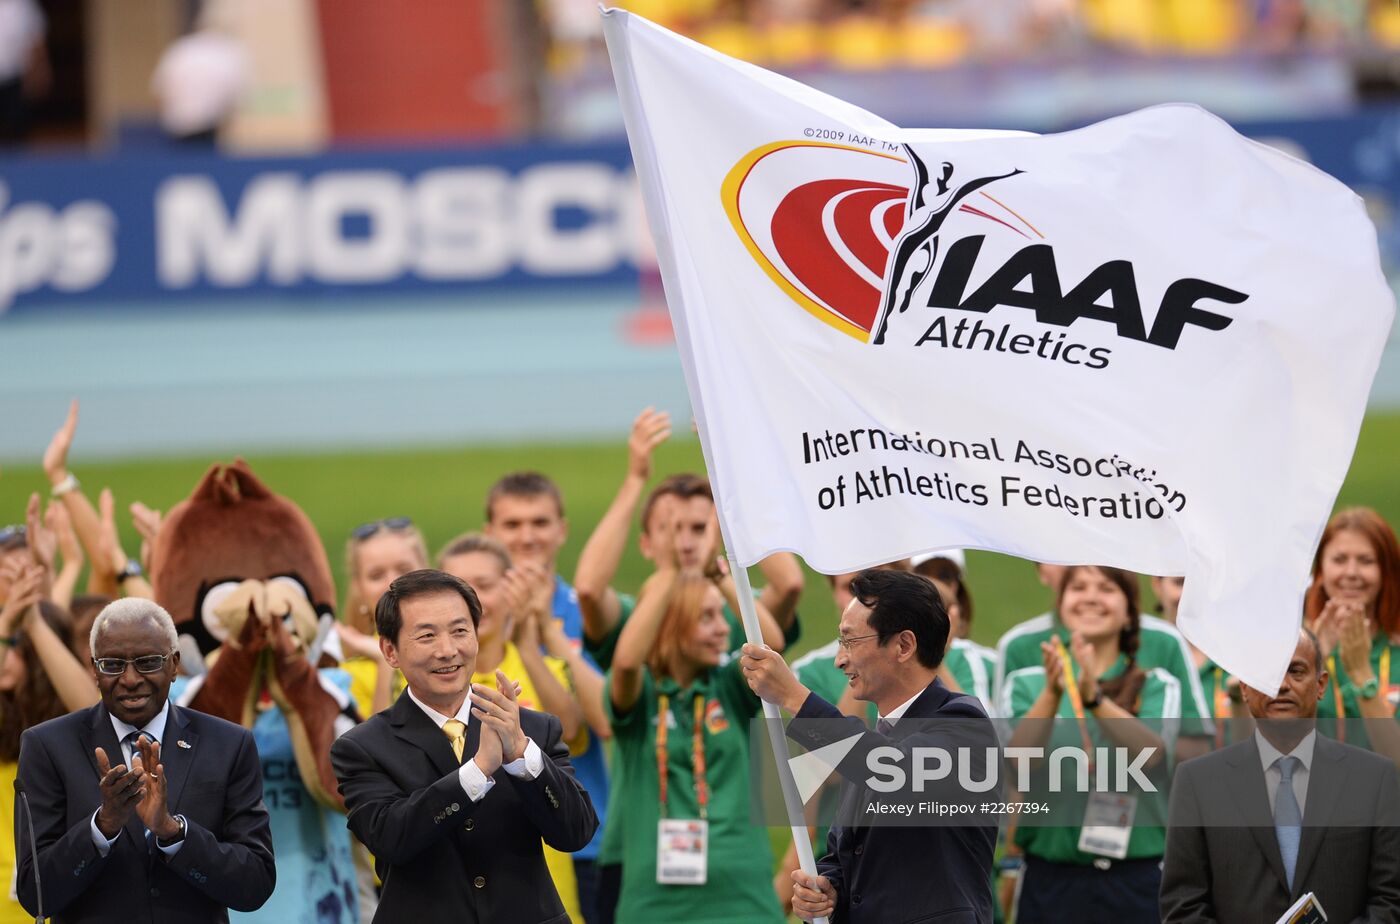 Closing ceremony of 2013 World Championships in Athletics